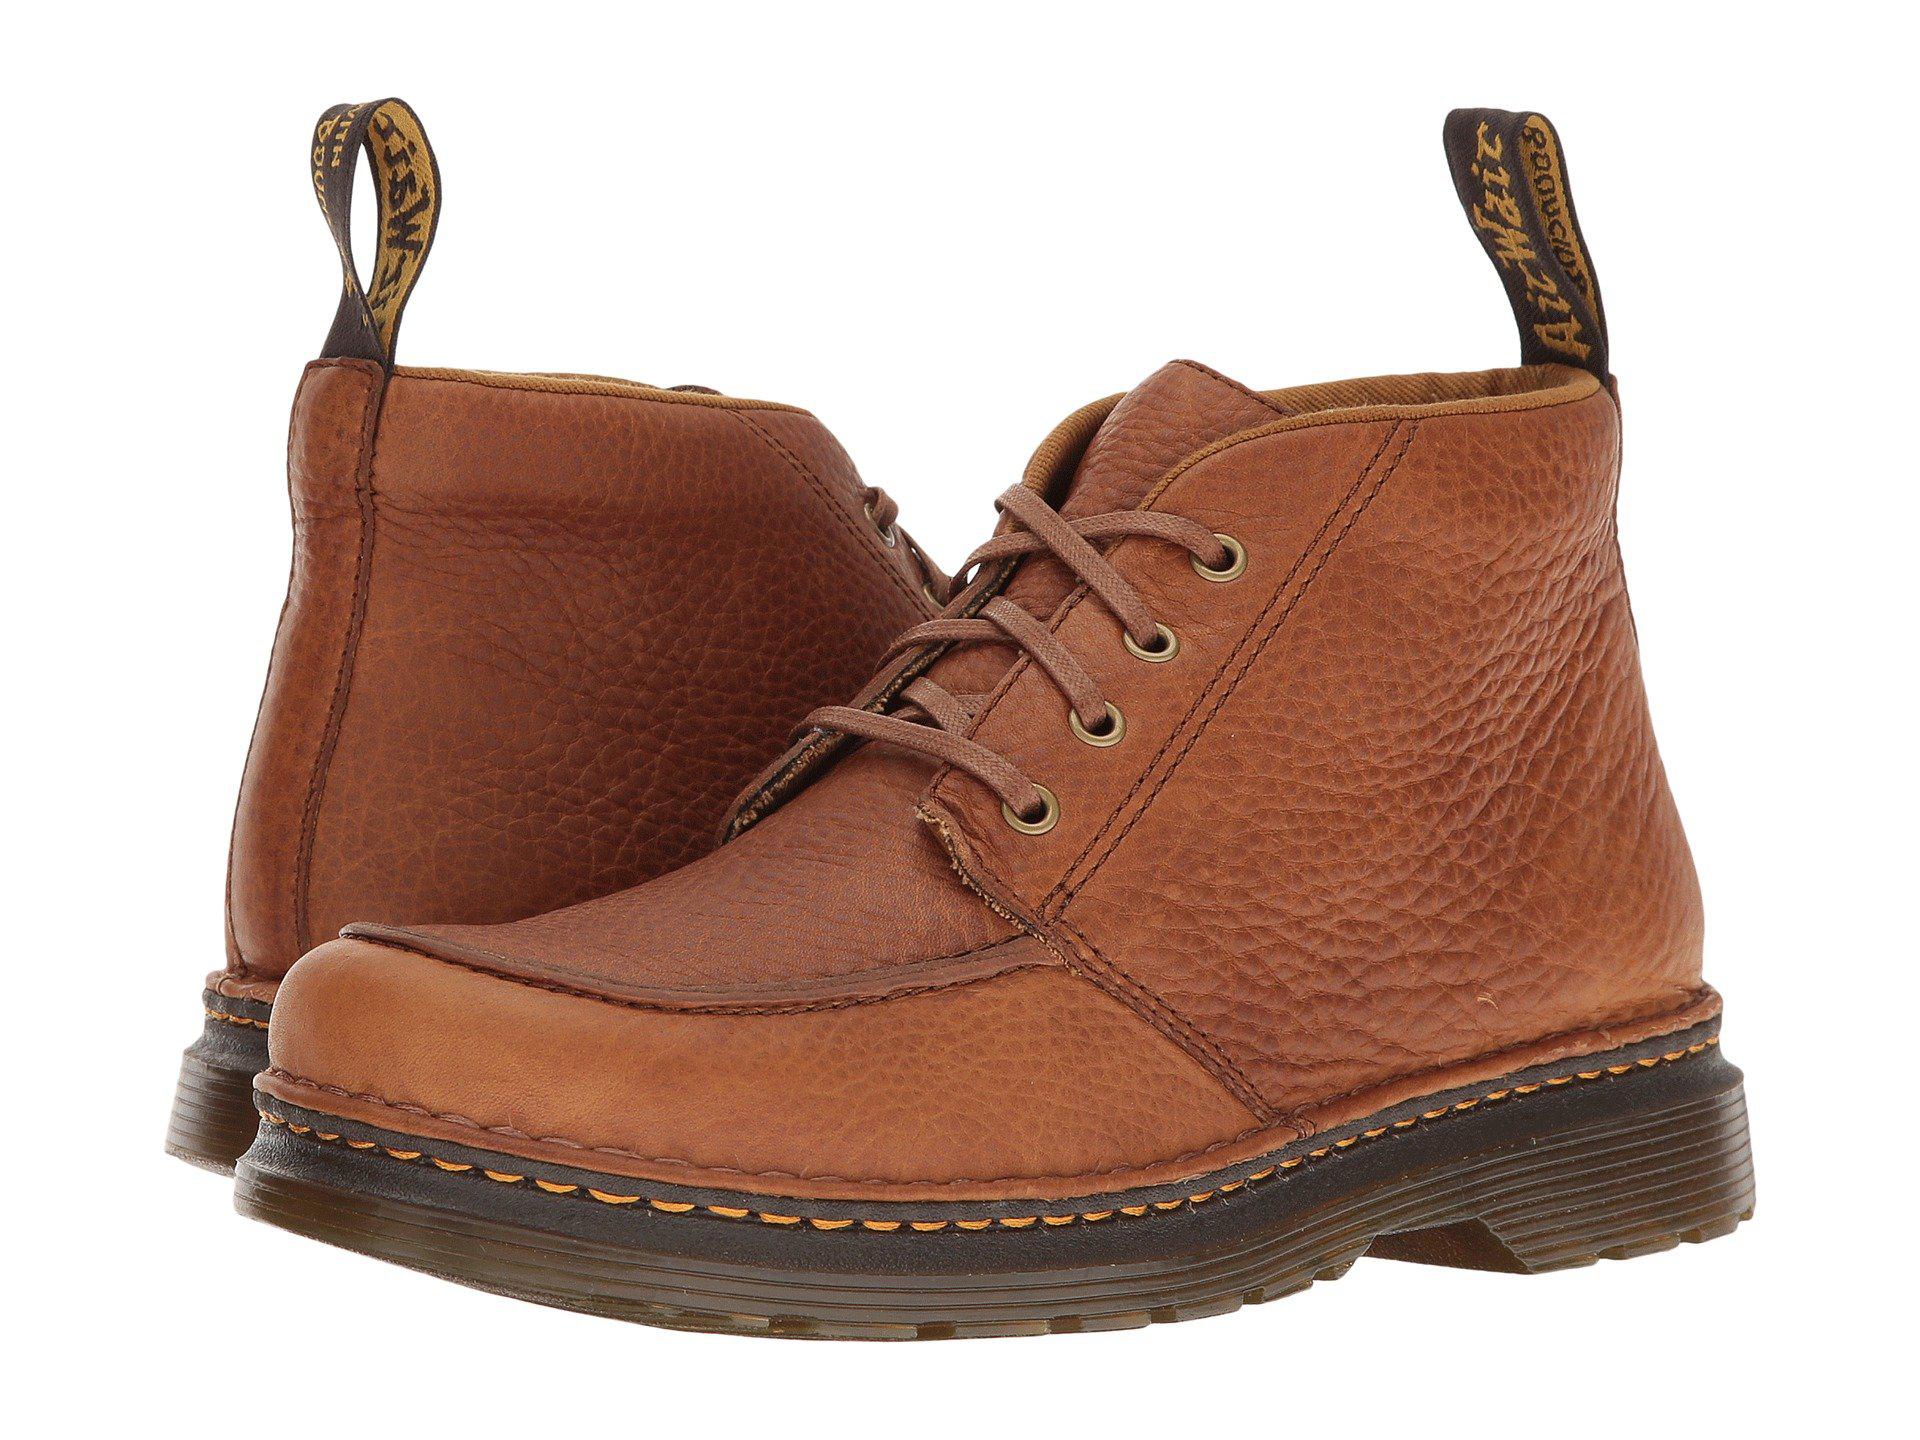 Dr. Martens Leather Austin in Tan 